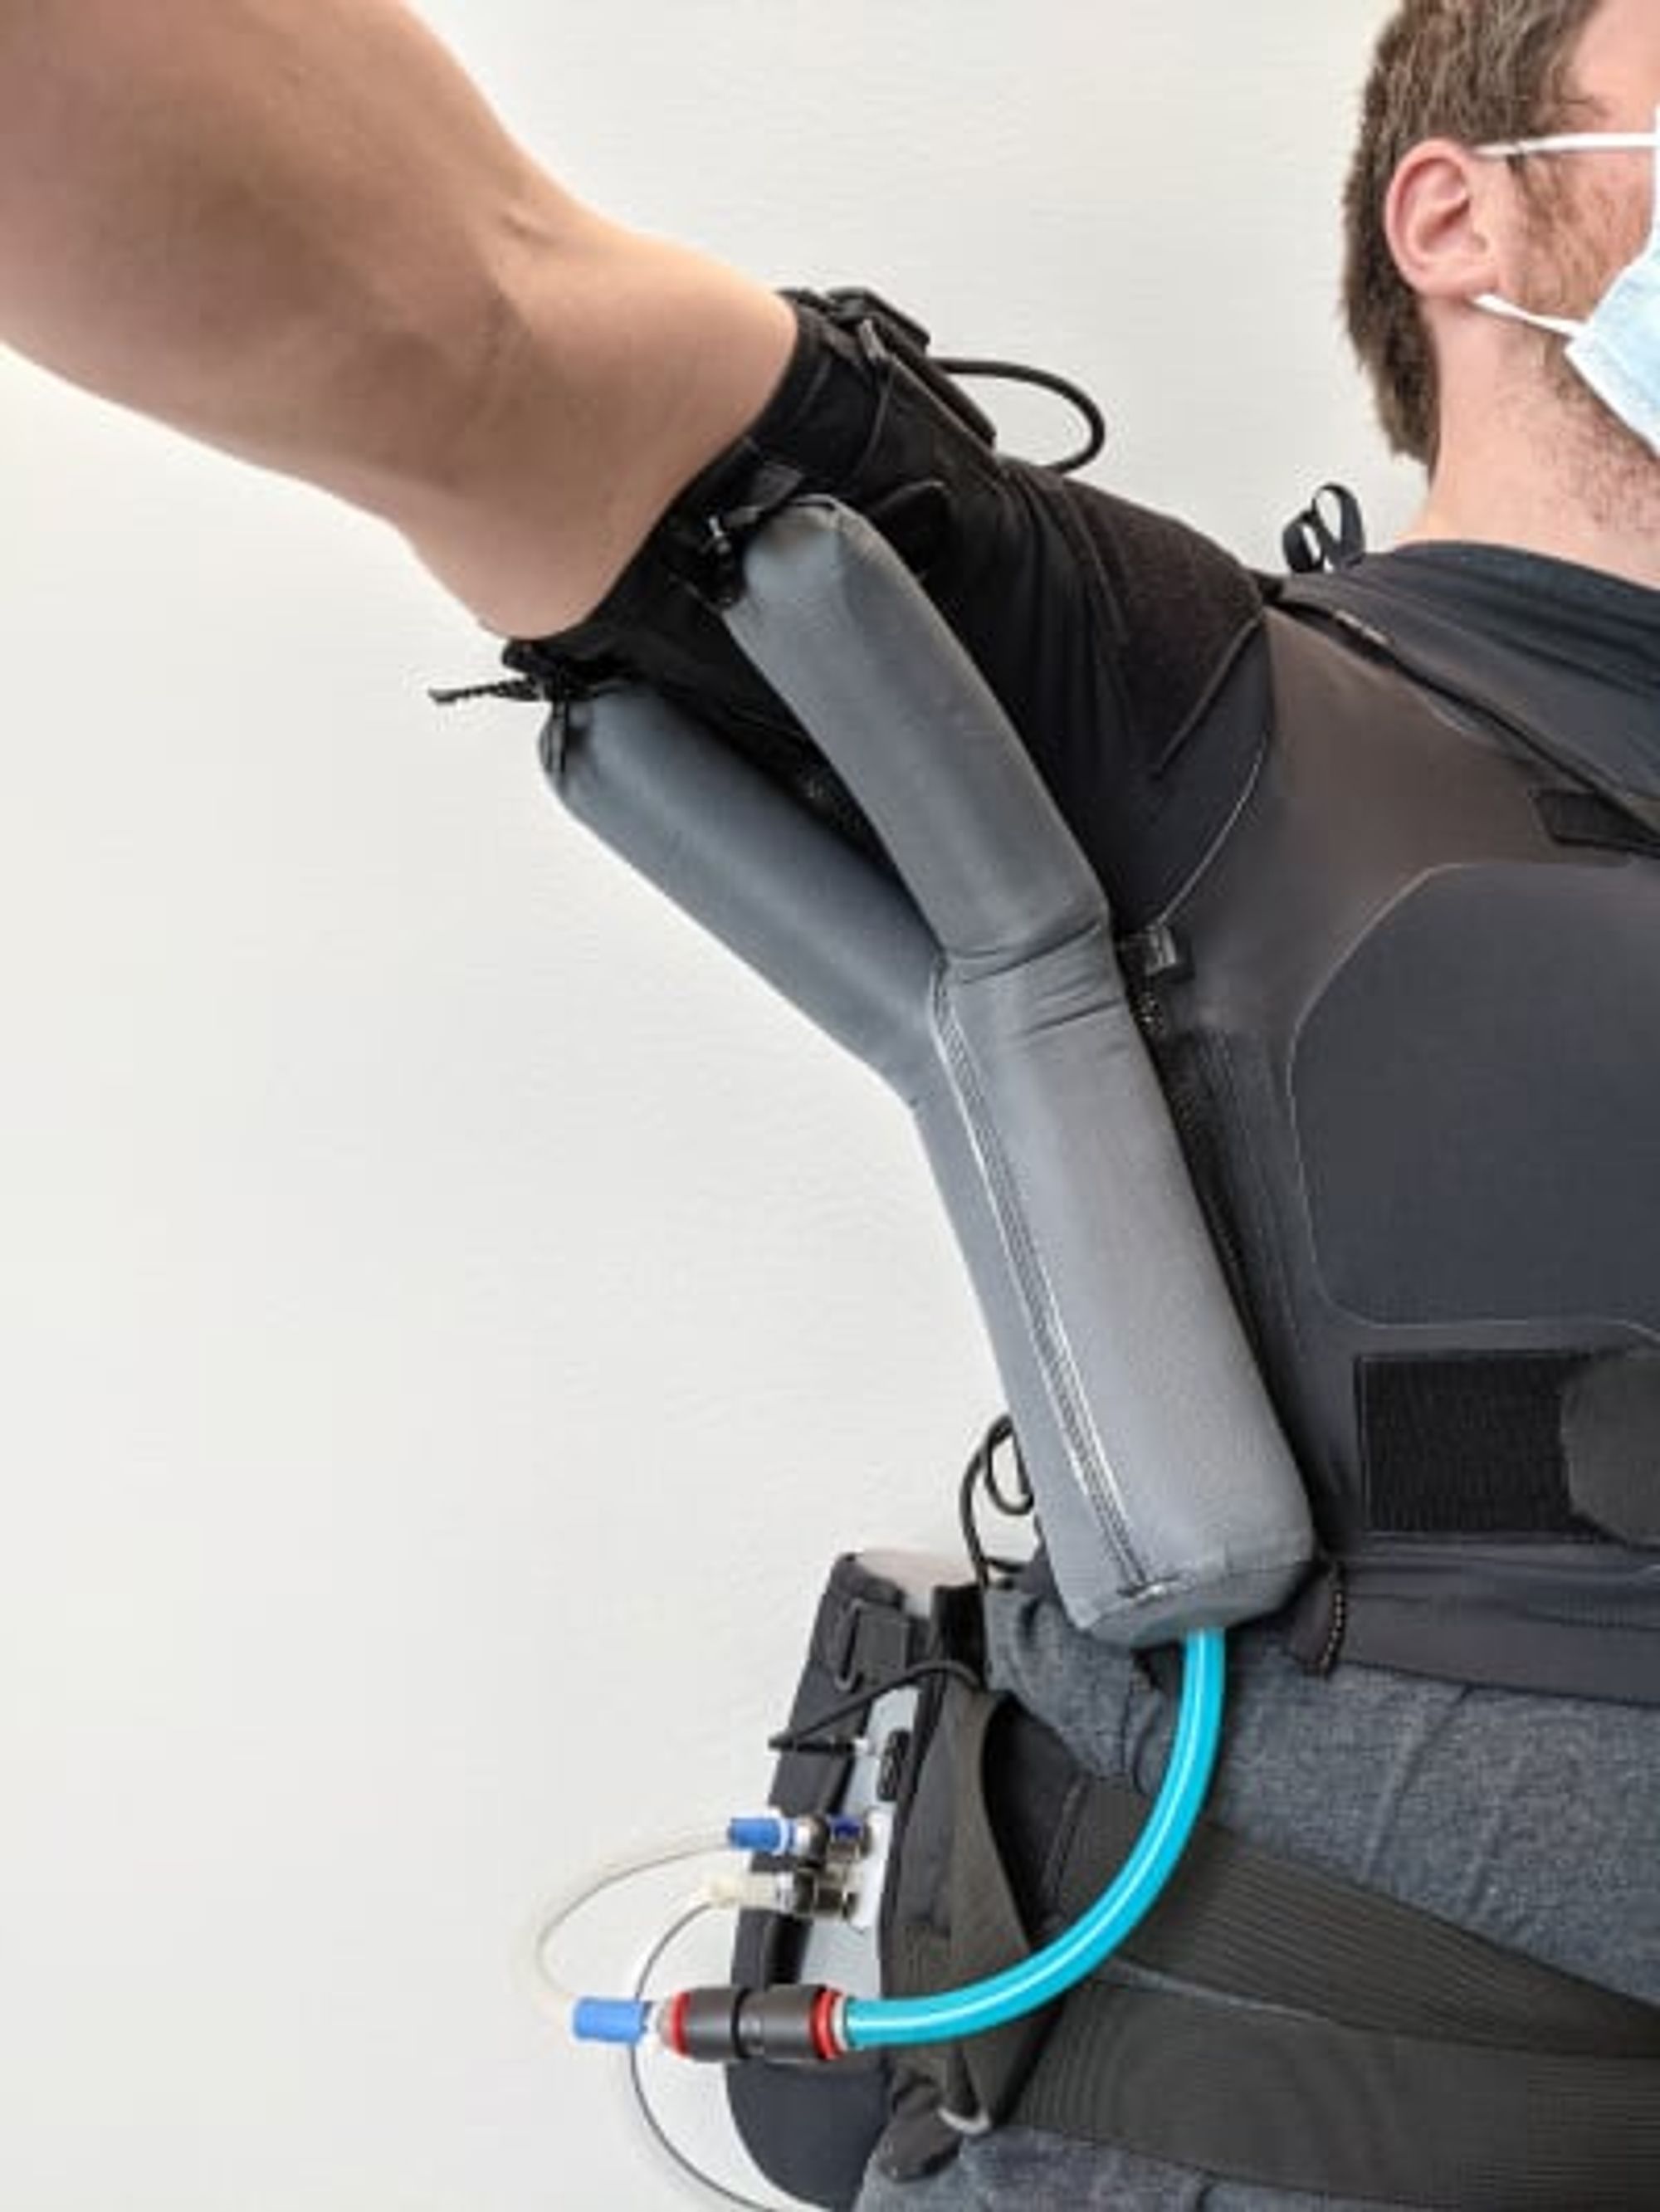 Soft Robotic Wearable Restores Arm Function for People with ALS - Tech Briefs